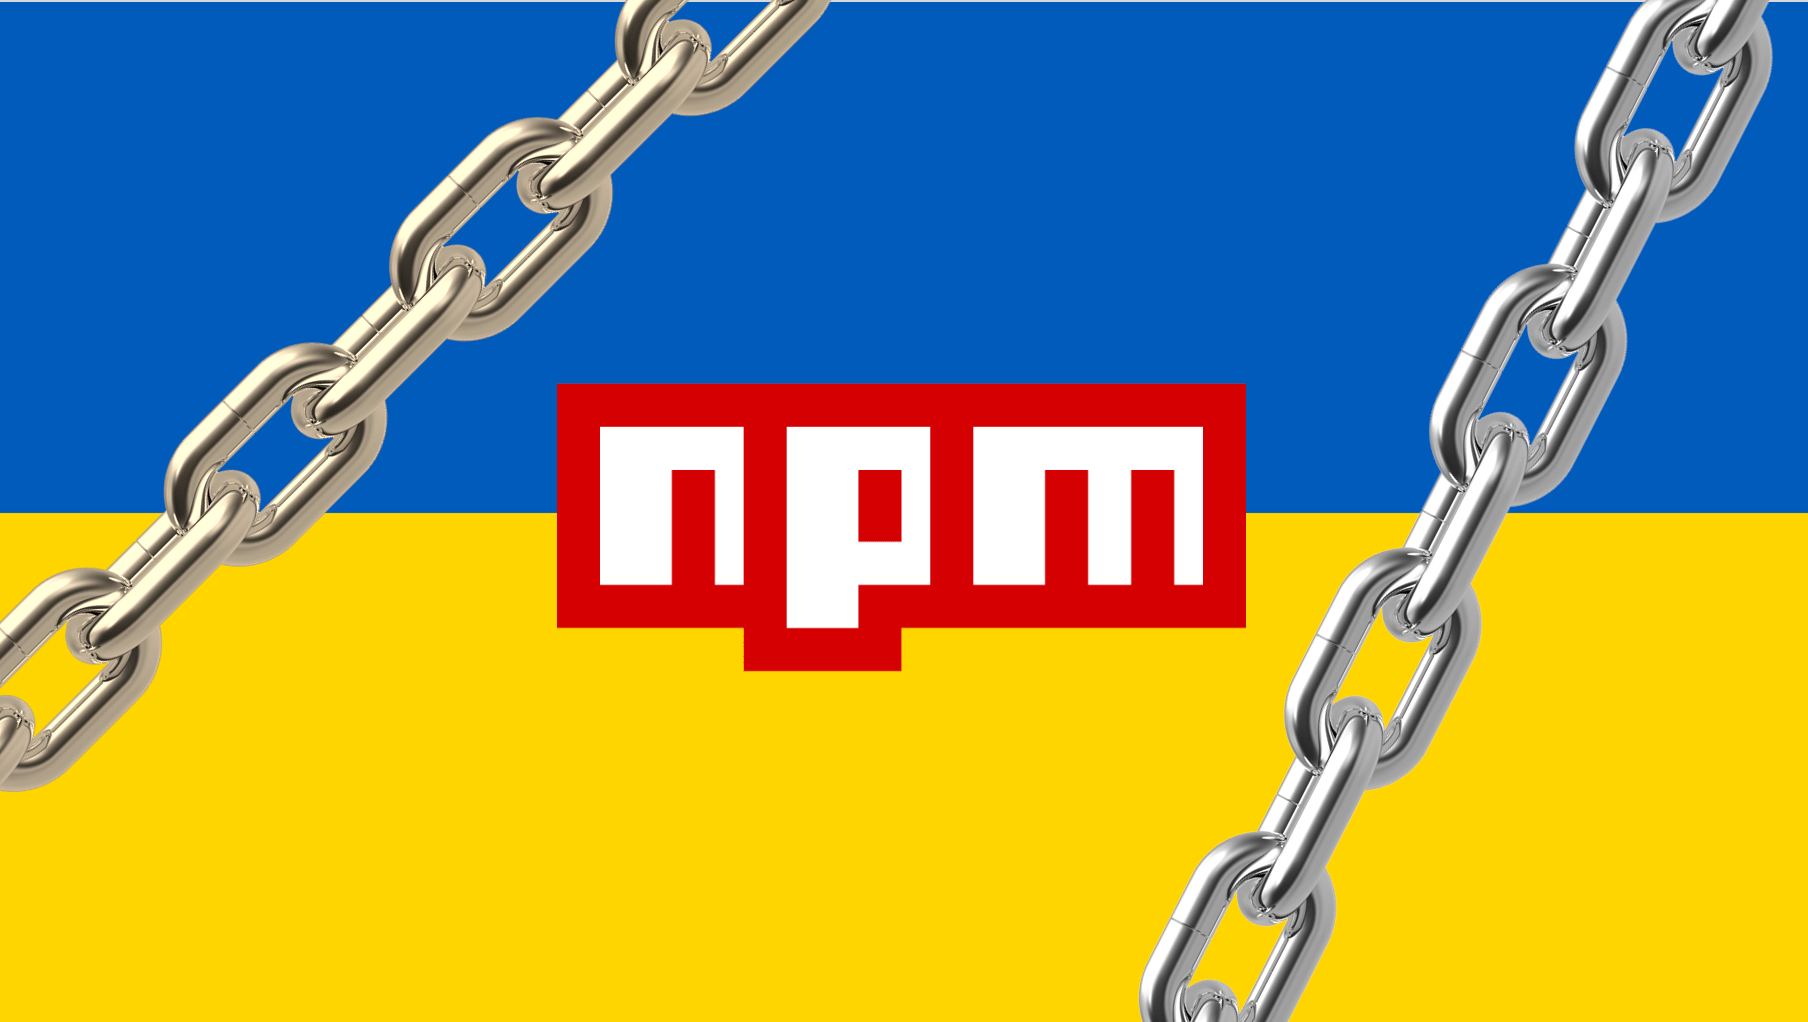 Well-known npm offer deletes data files to protest Ukraine war